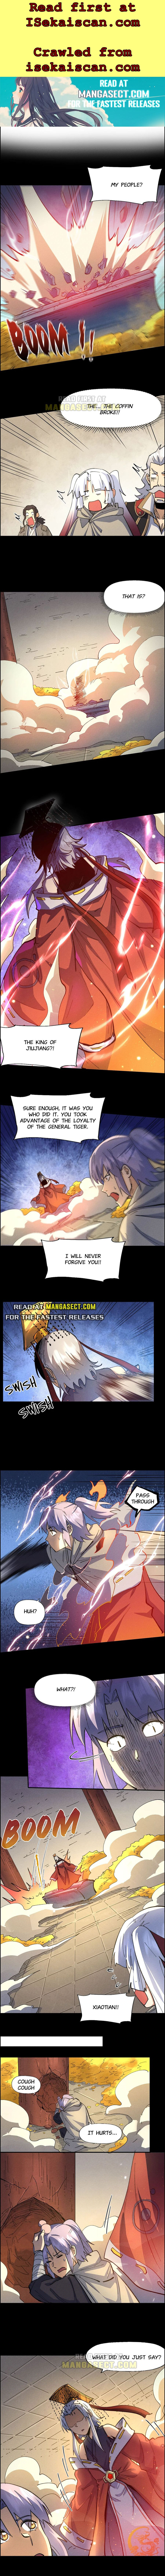 The Strongest Protagonist Of All Time! - Page 1